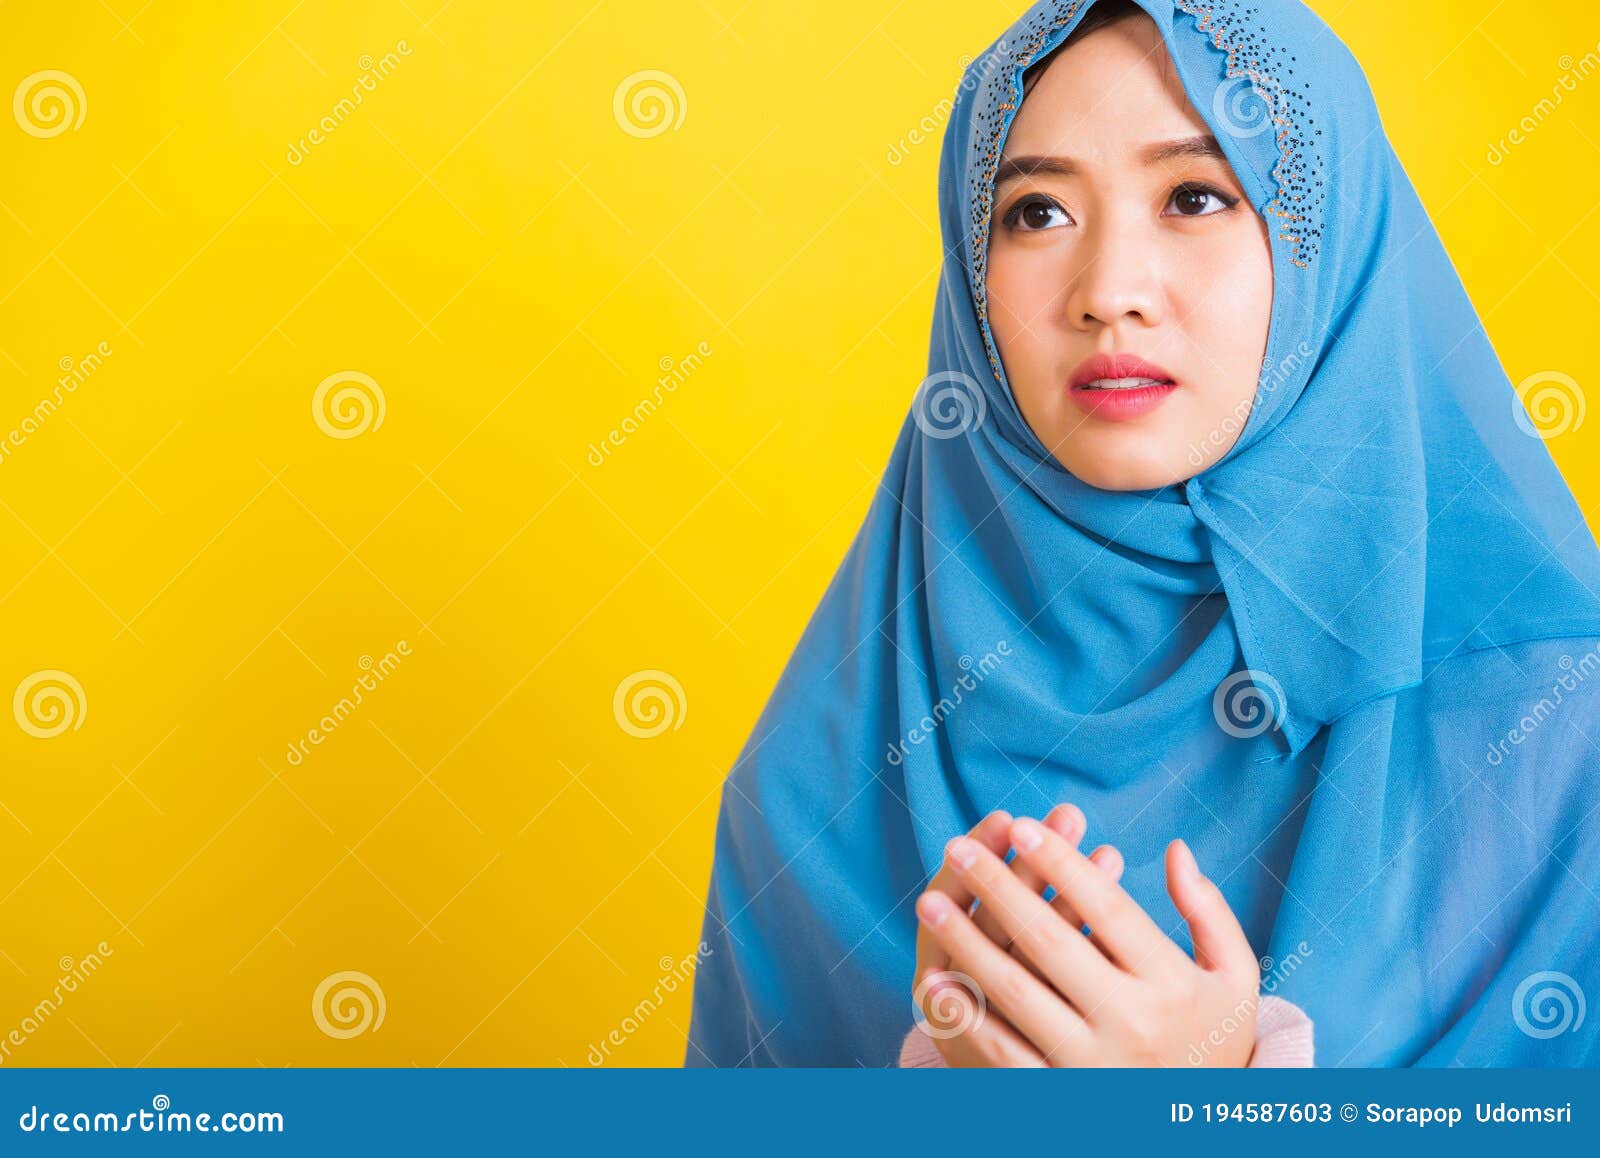 Woman Wearing Hijab she Henna Decorated Hands Praying To ...